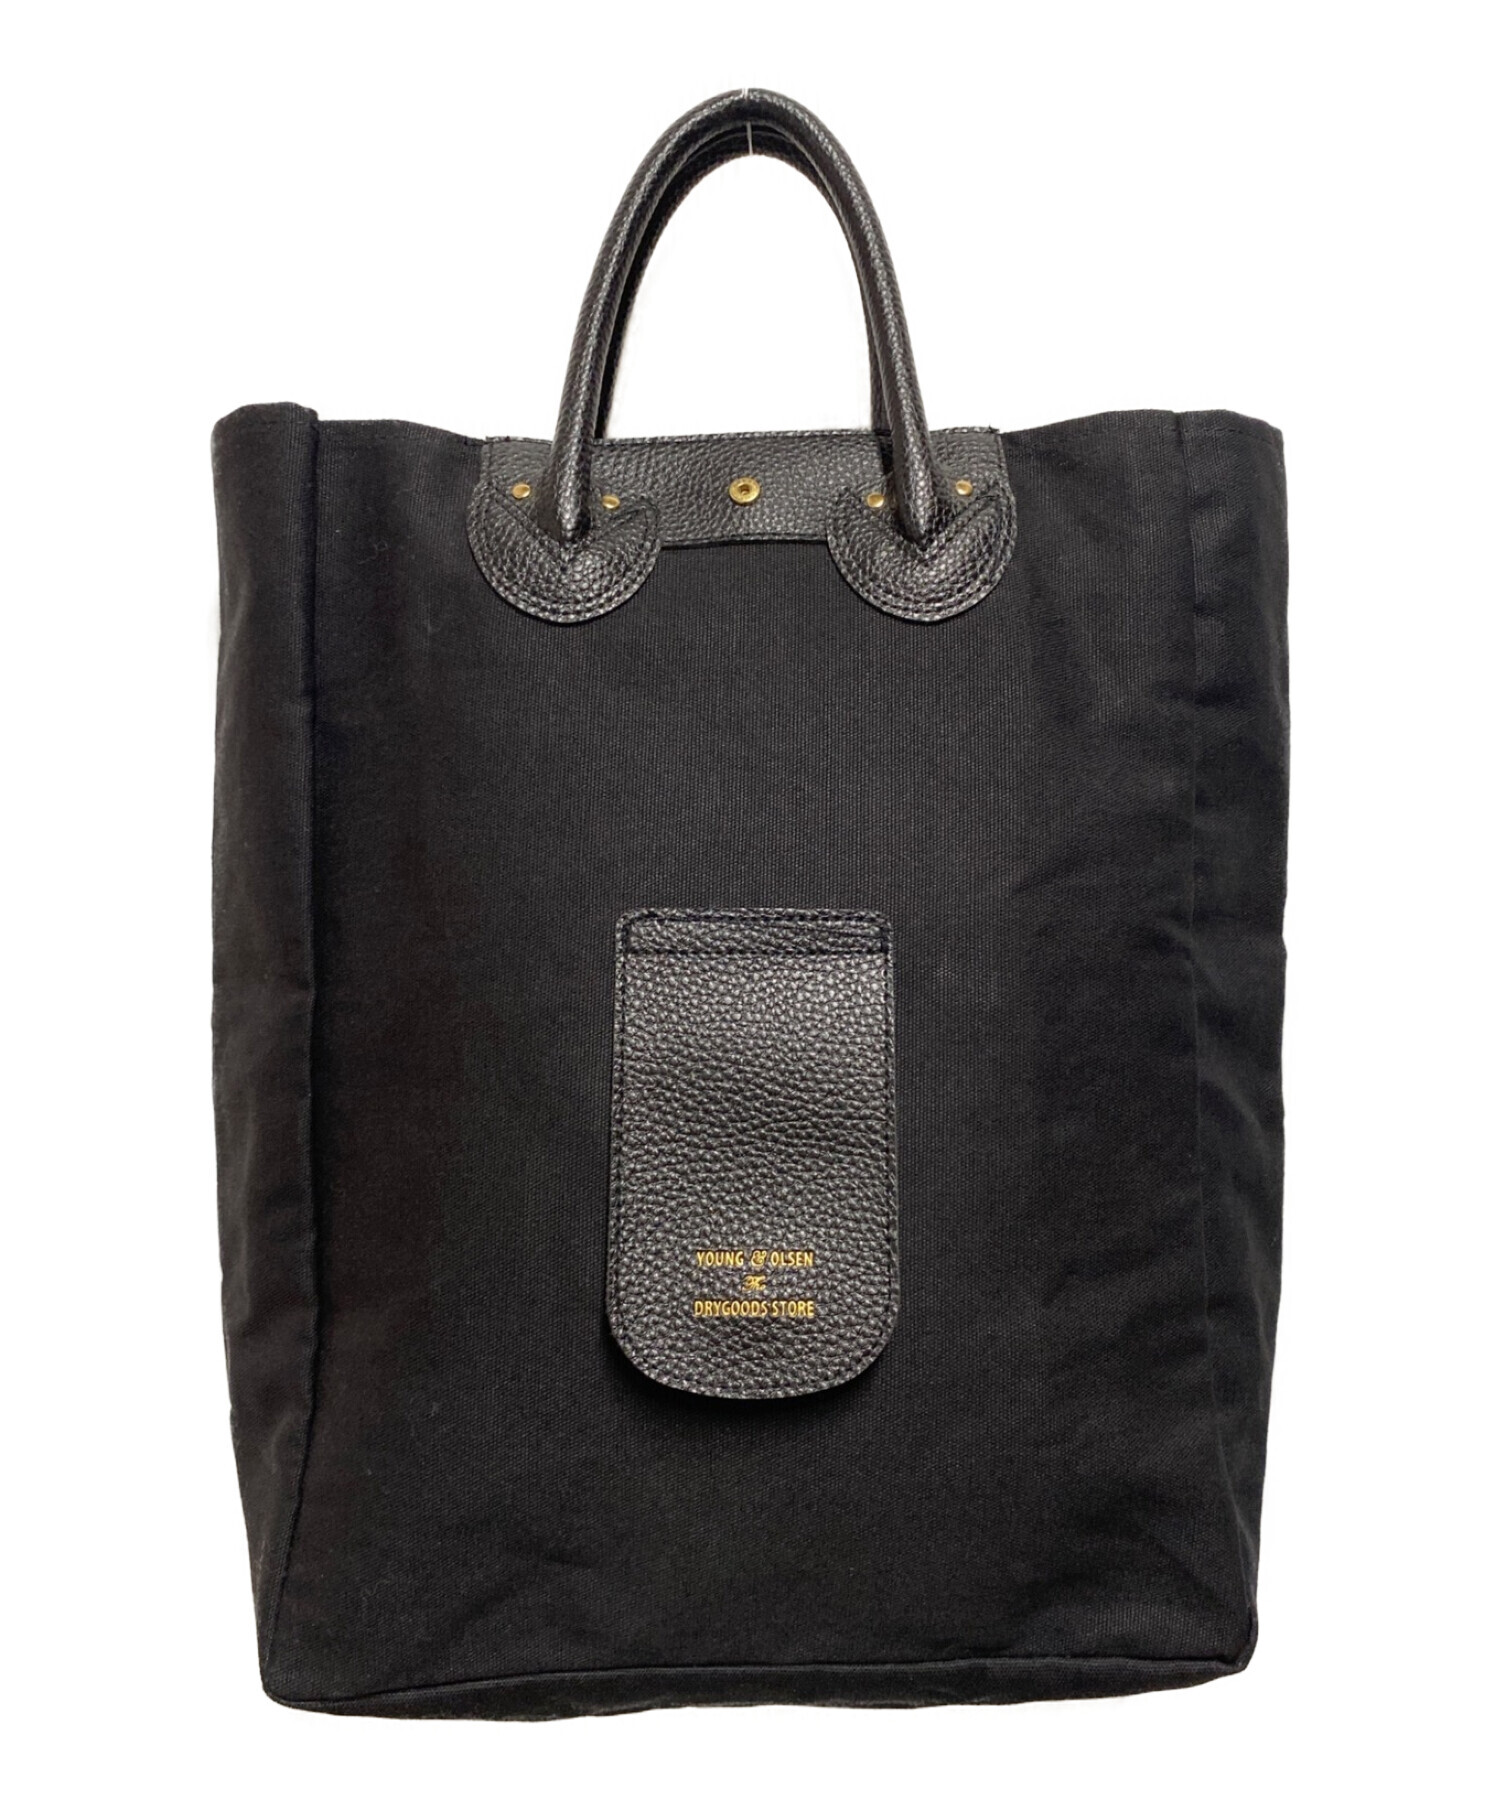 YOUNG \u0026 OLSEN The DRYGOODS STORE TOTE B…横約３０センチ